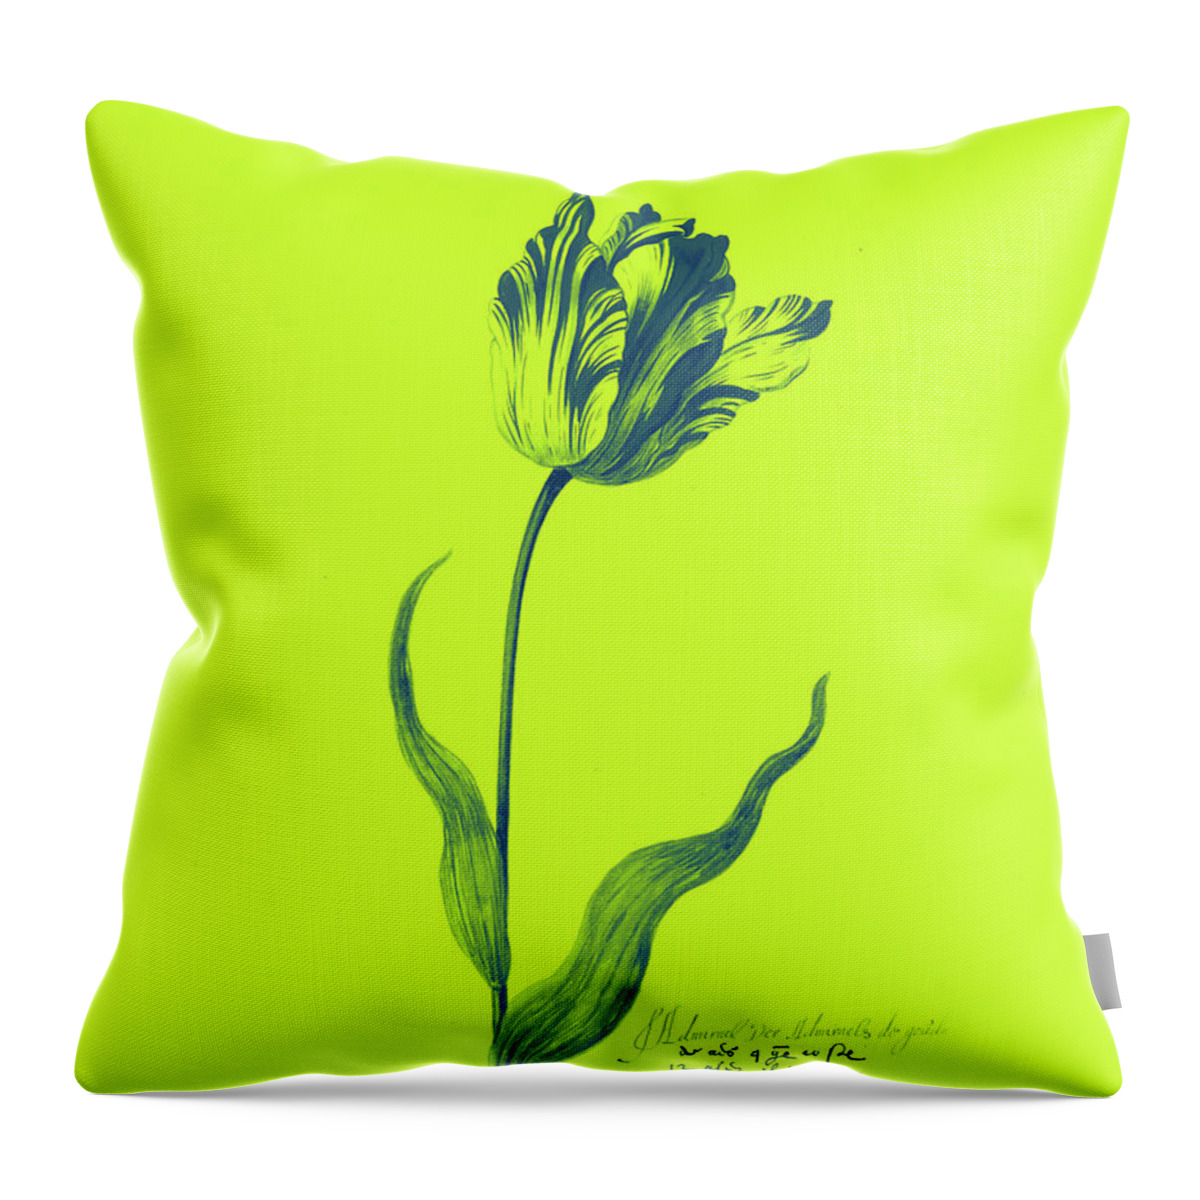 Poster Throw Pillow featuring the painting Great Tulip Book , Admirael De Gouda Poster by MotionAge Designs